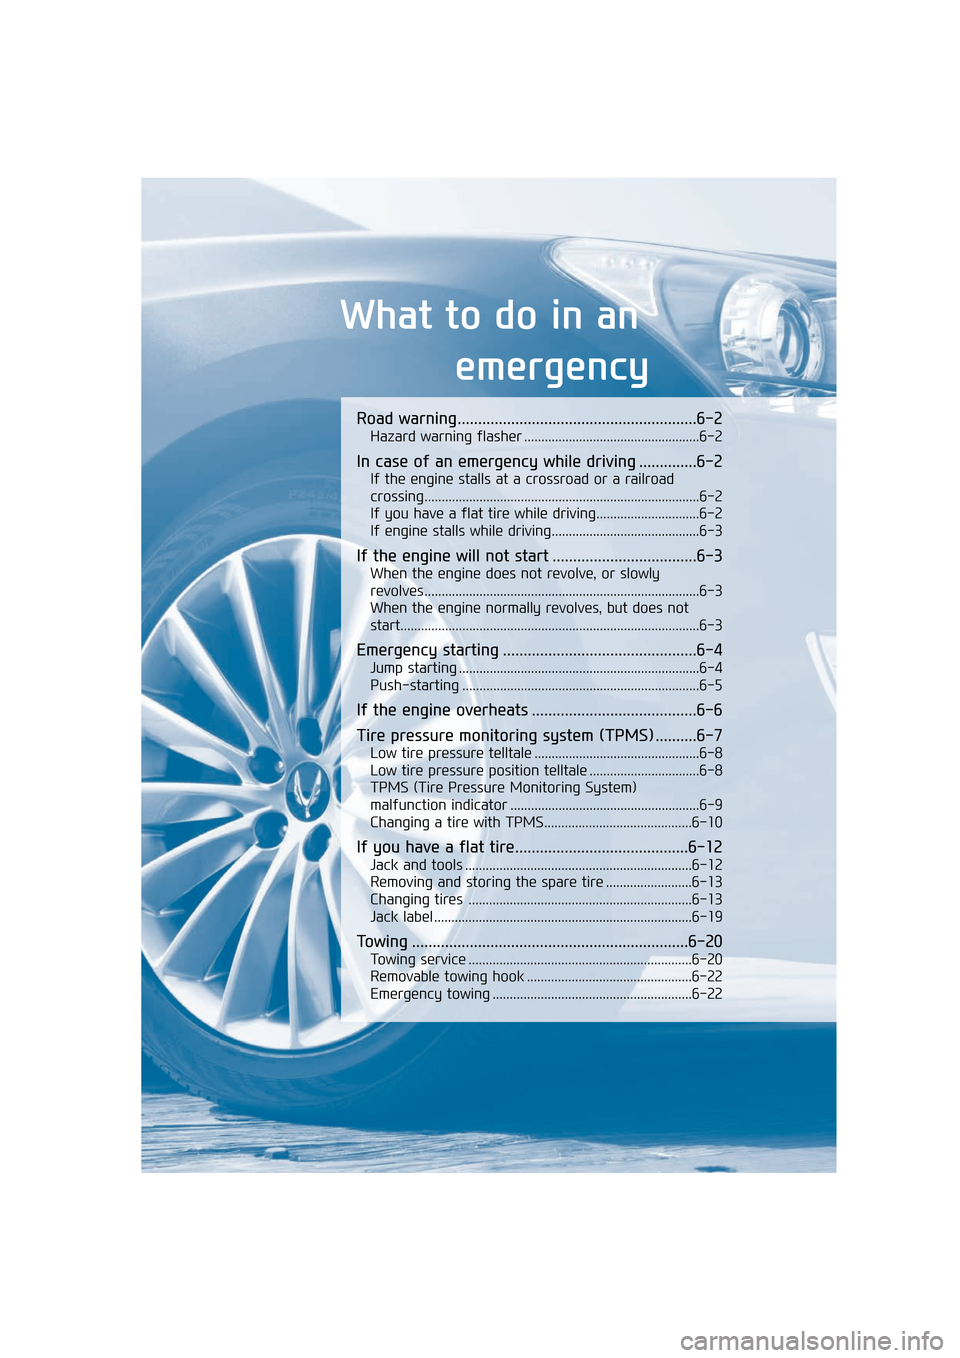 Hyundai Equus 2016  Owners Manual What to do in an emergency
Road warning..........................................................6-2
Hazard warning flasher ...................................................6-2
In case of an emergen